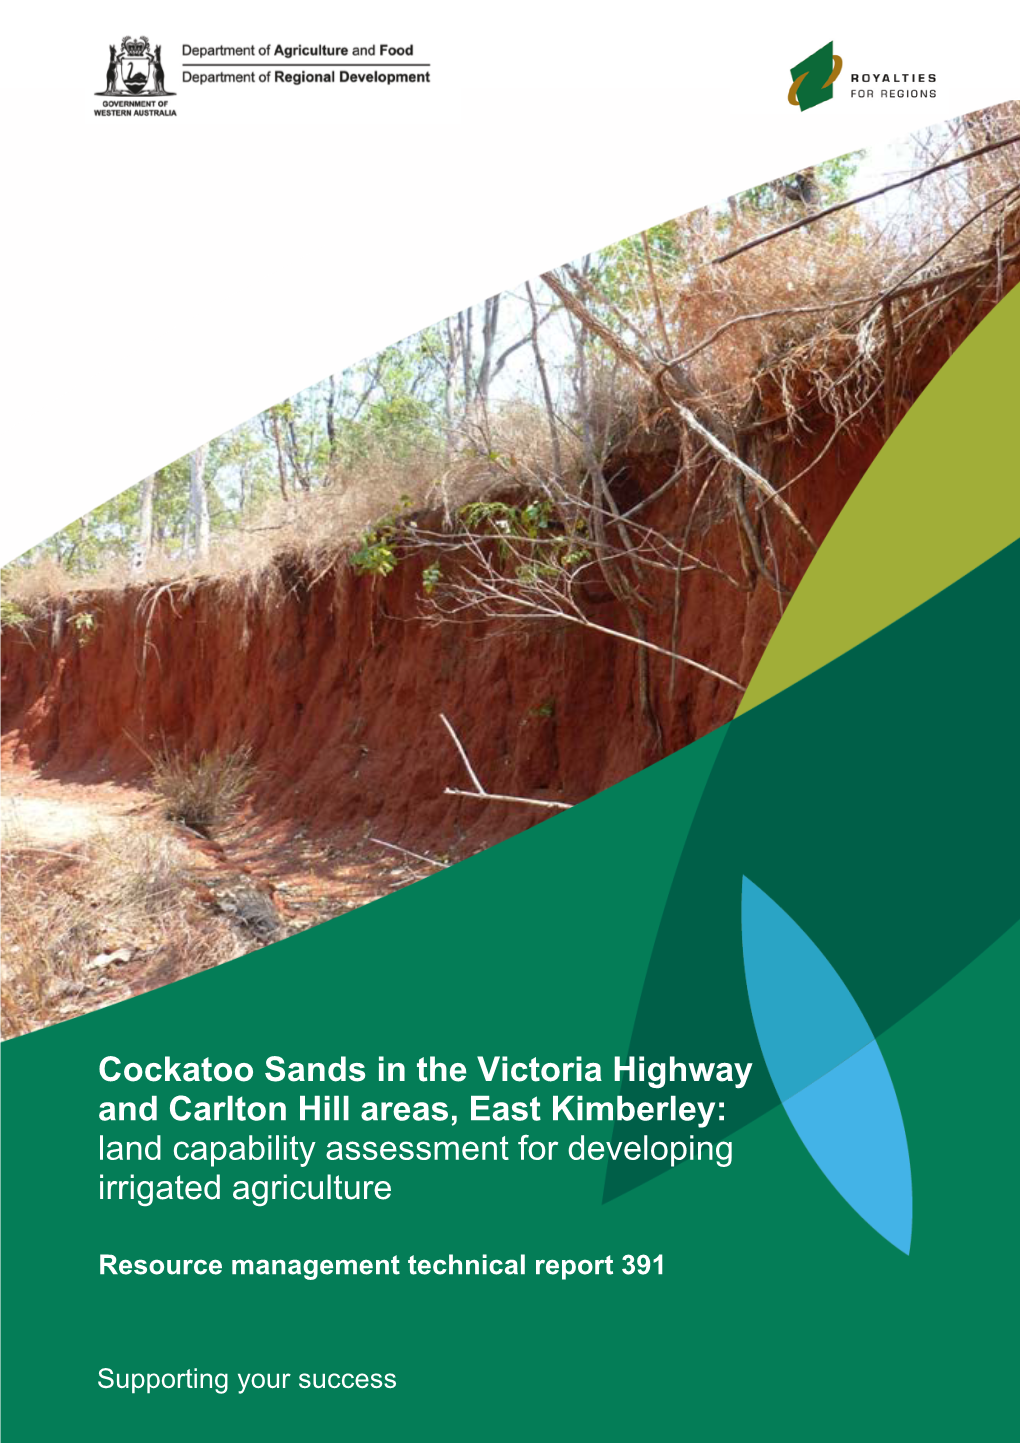 Cockatoo Sands in the Victoria Highway and Carlton Hill Areas, East Kimberley: Land Capability Assessment for Developing Irrigated Agriculture